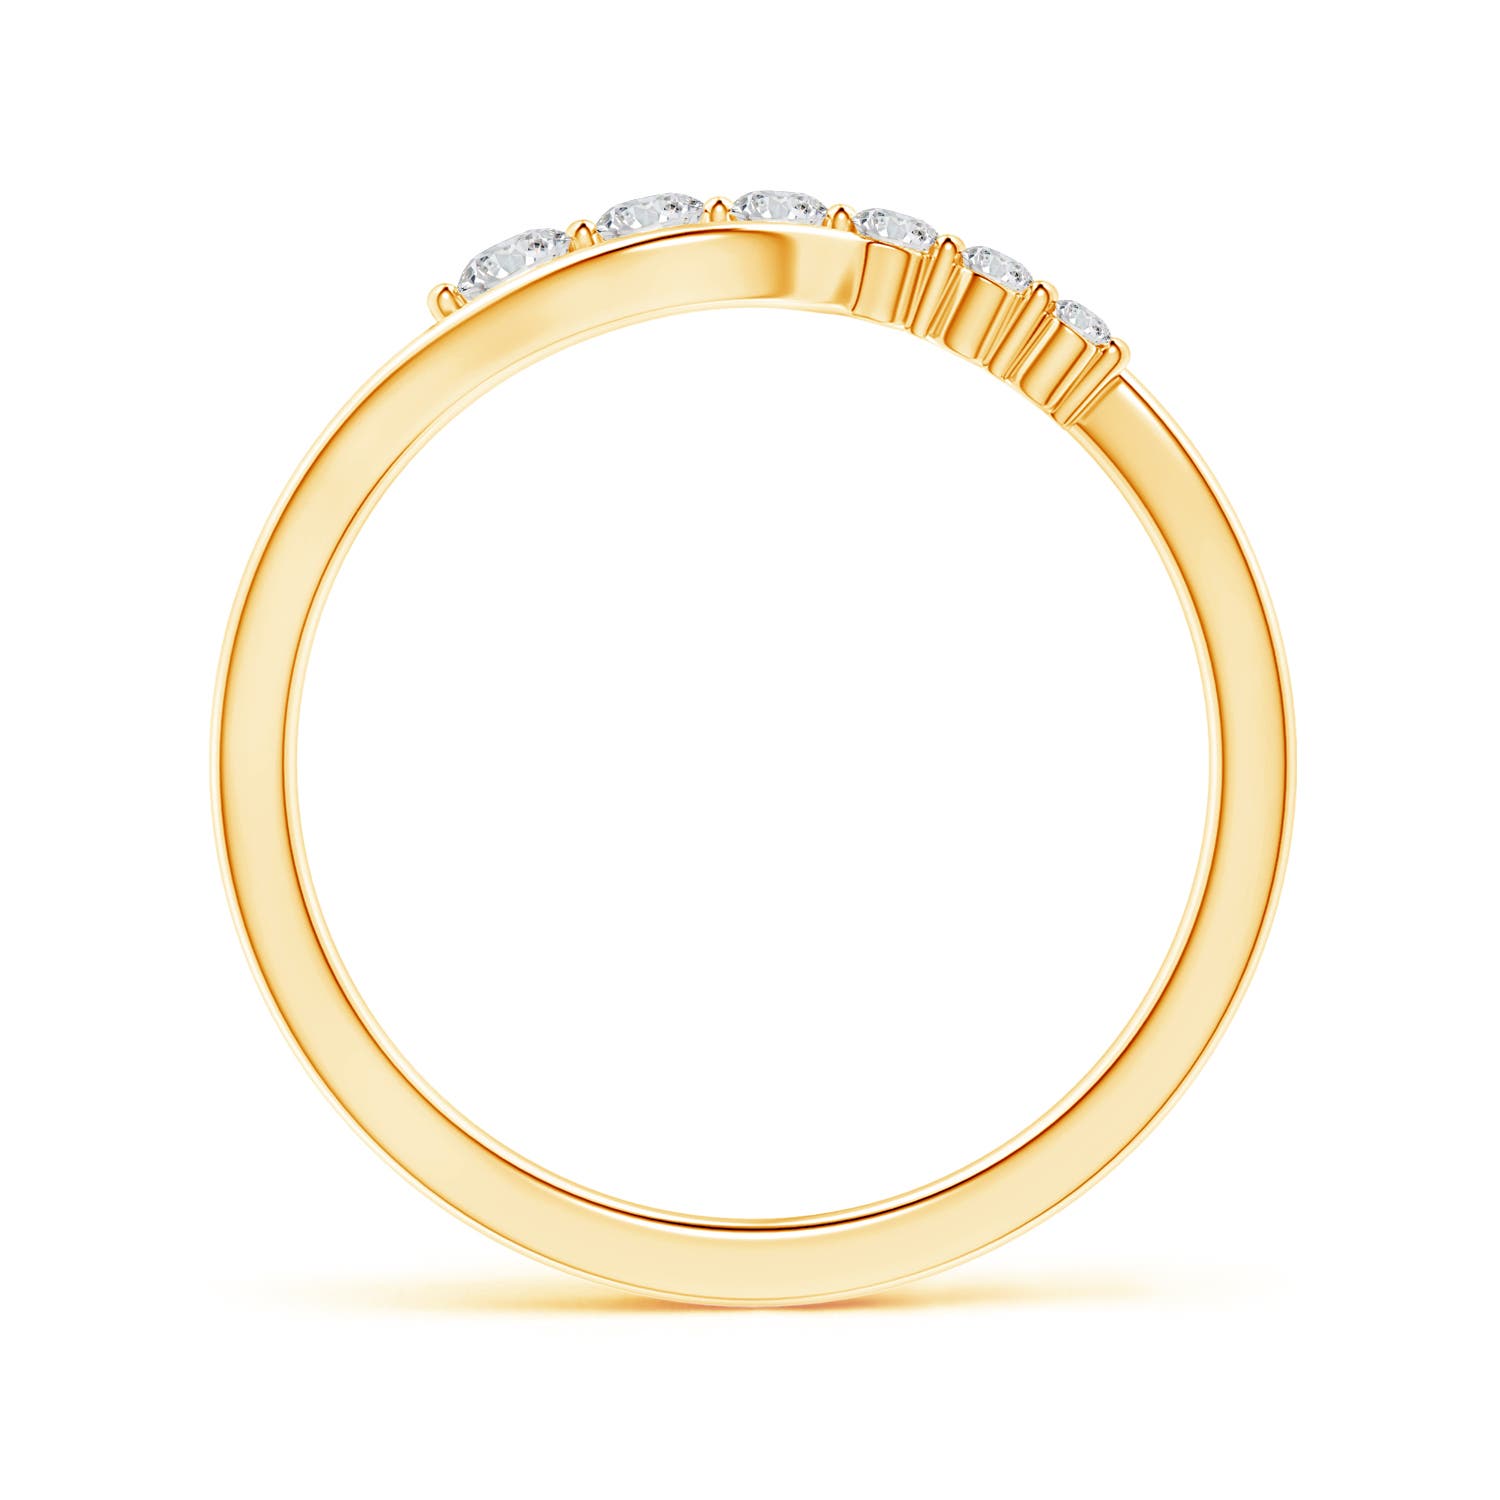 H, SI2 / 0.18 CT / 14 KT Yellow Gold